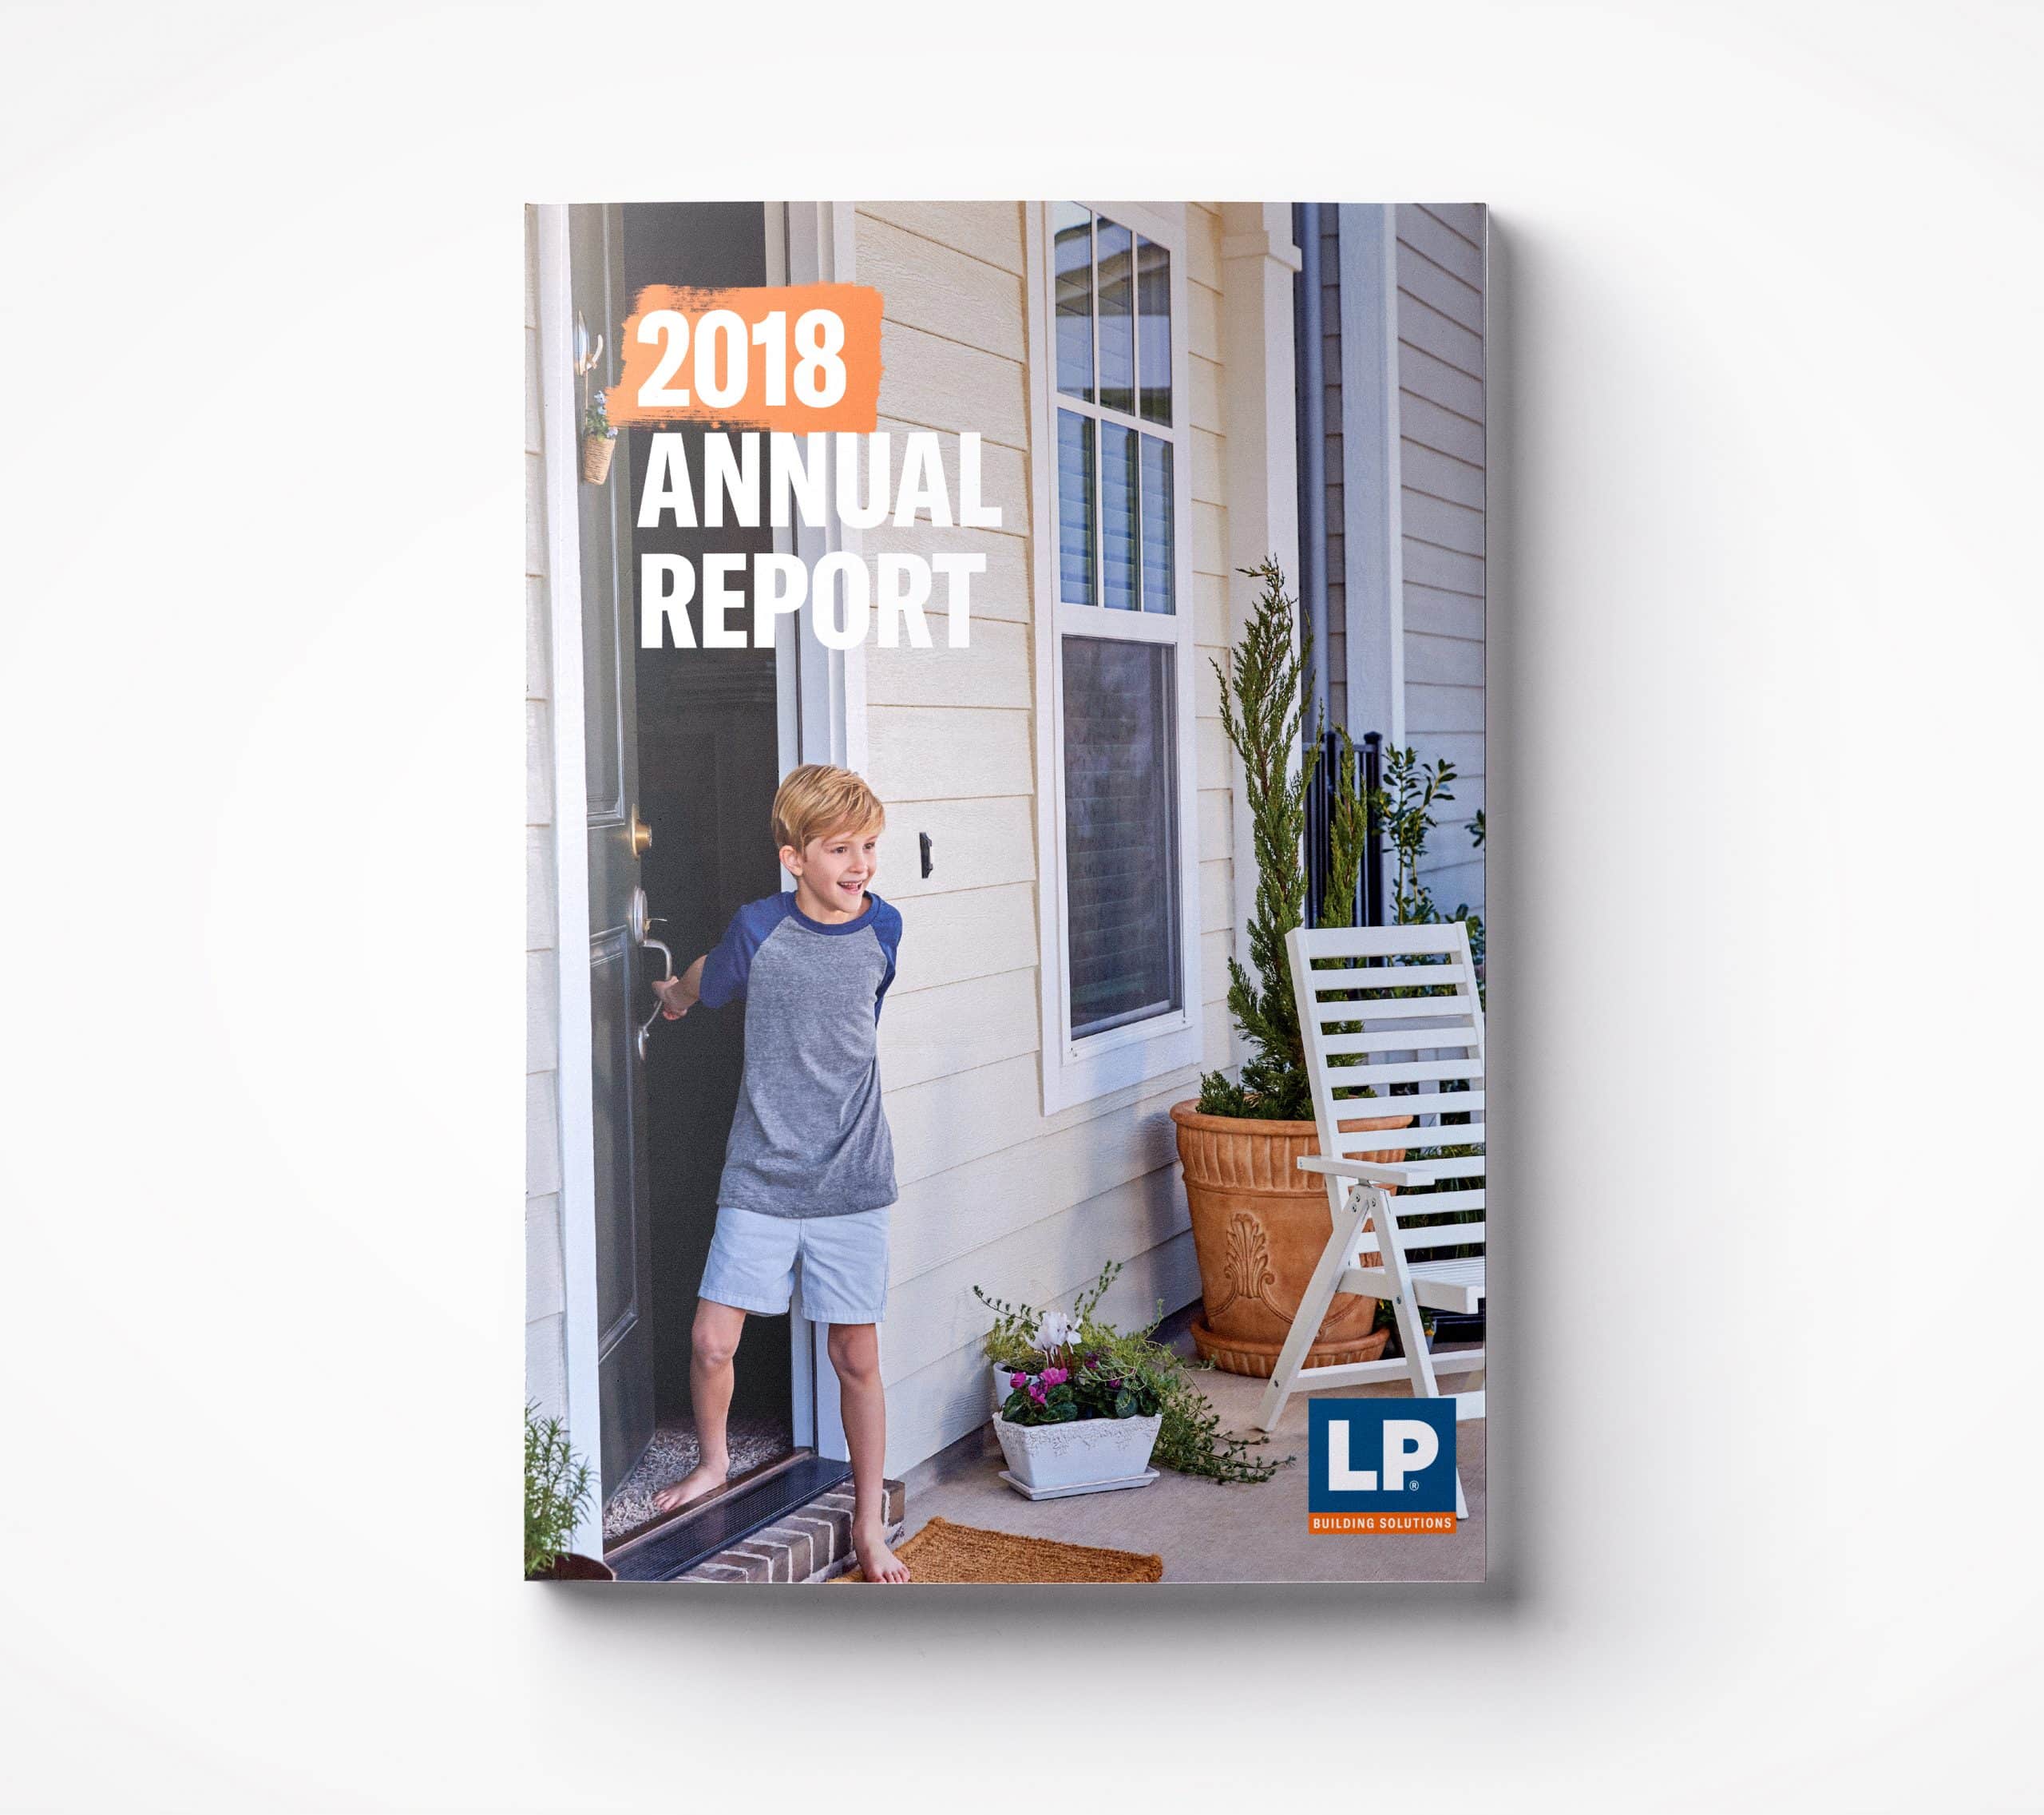 LP Building Solutions Annual Report Cover